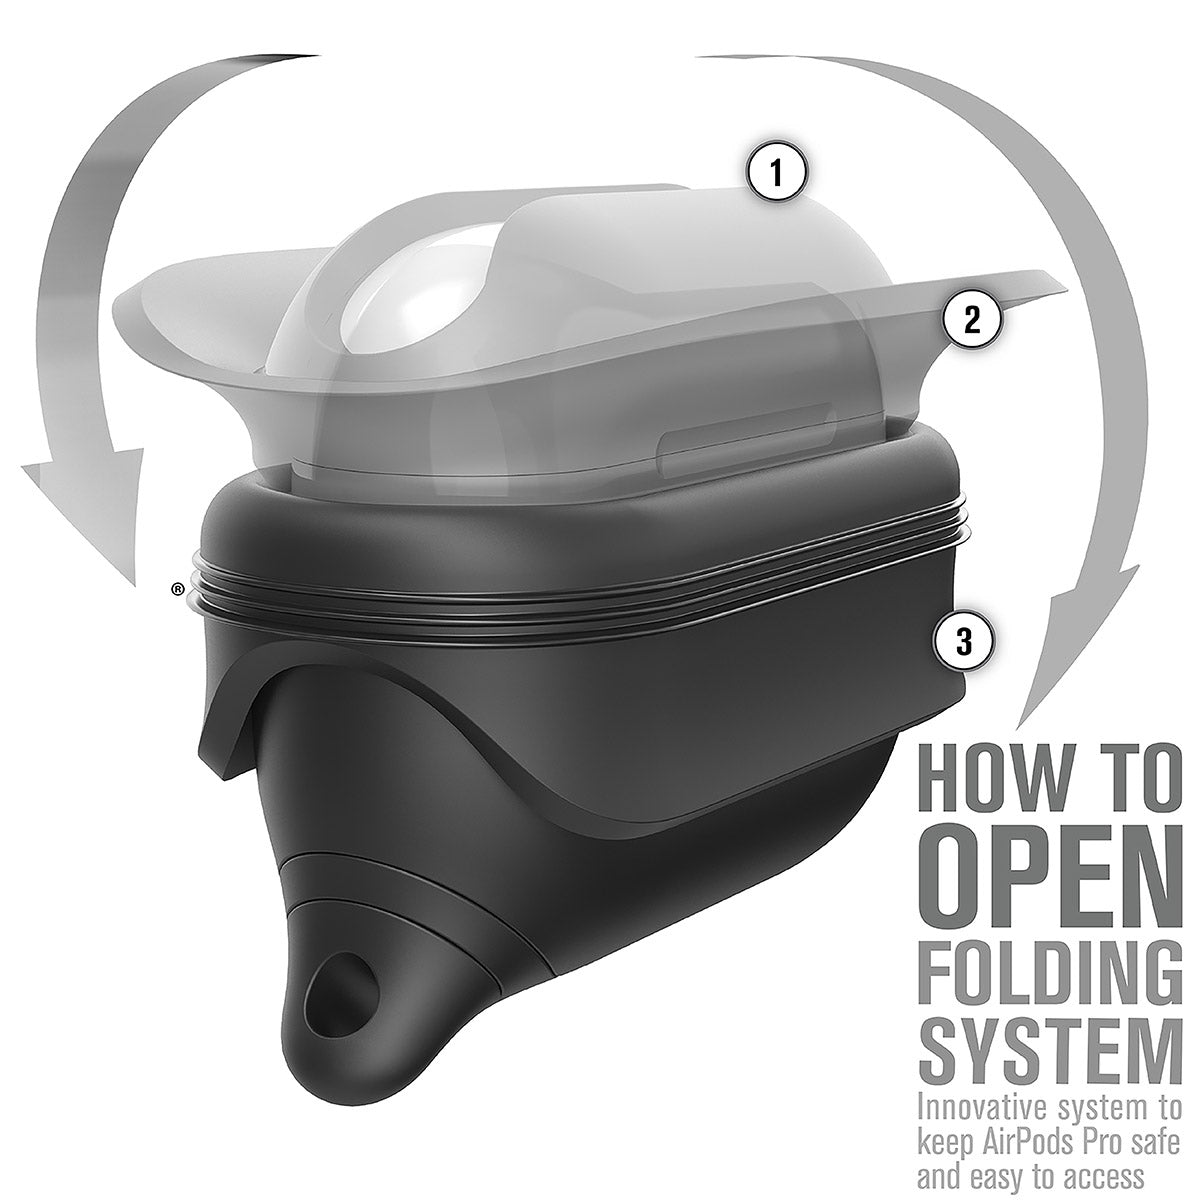 CATAPLAPDPROBLK | catalyst airpods pro gen 2 1 waterproof case carabiner special edition black with arrows on how to open the case text reads how to open folding system innovative system to keep airpods pro safe and easy to access